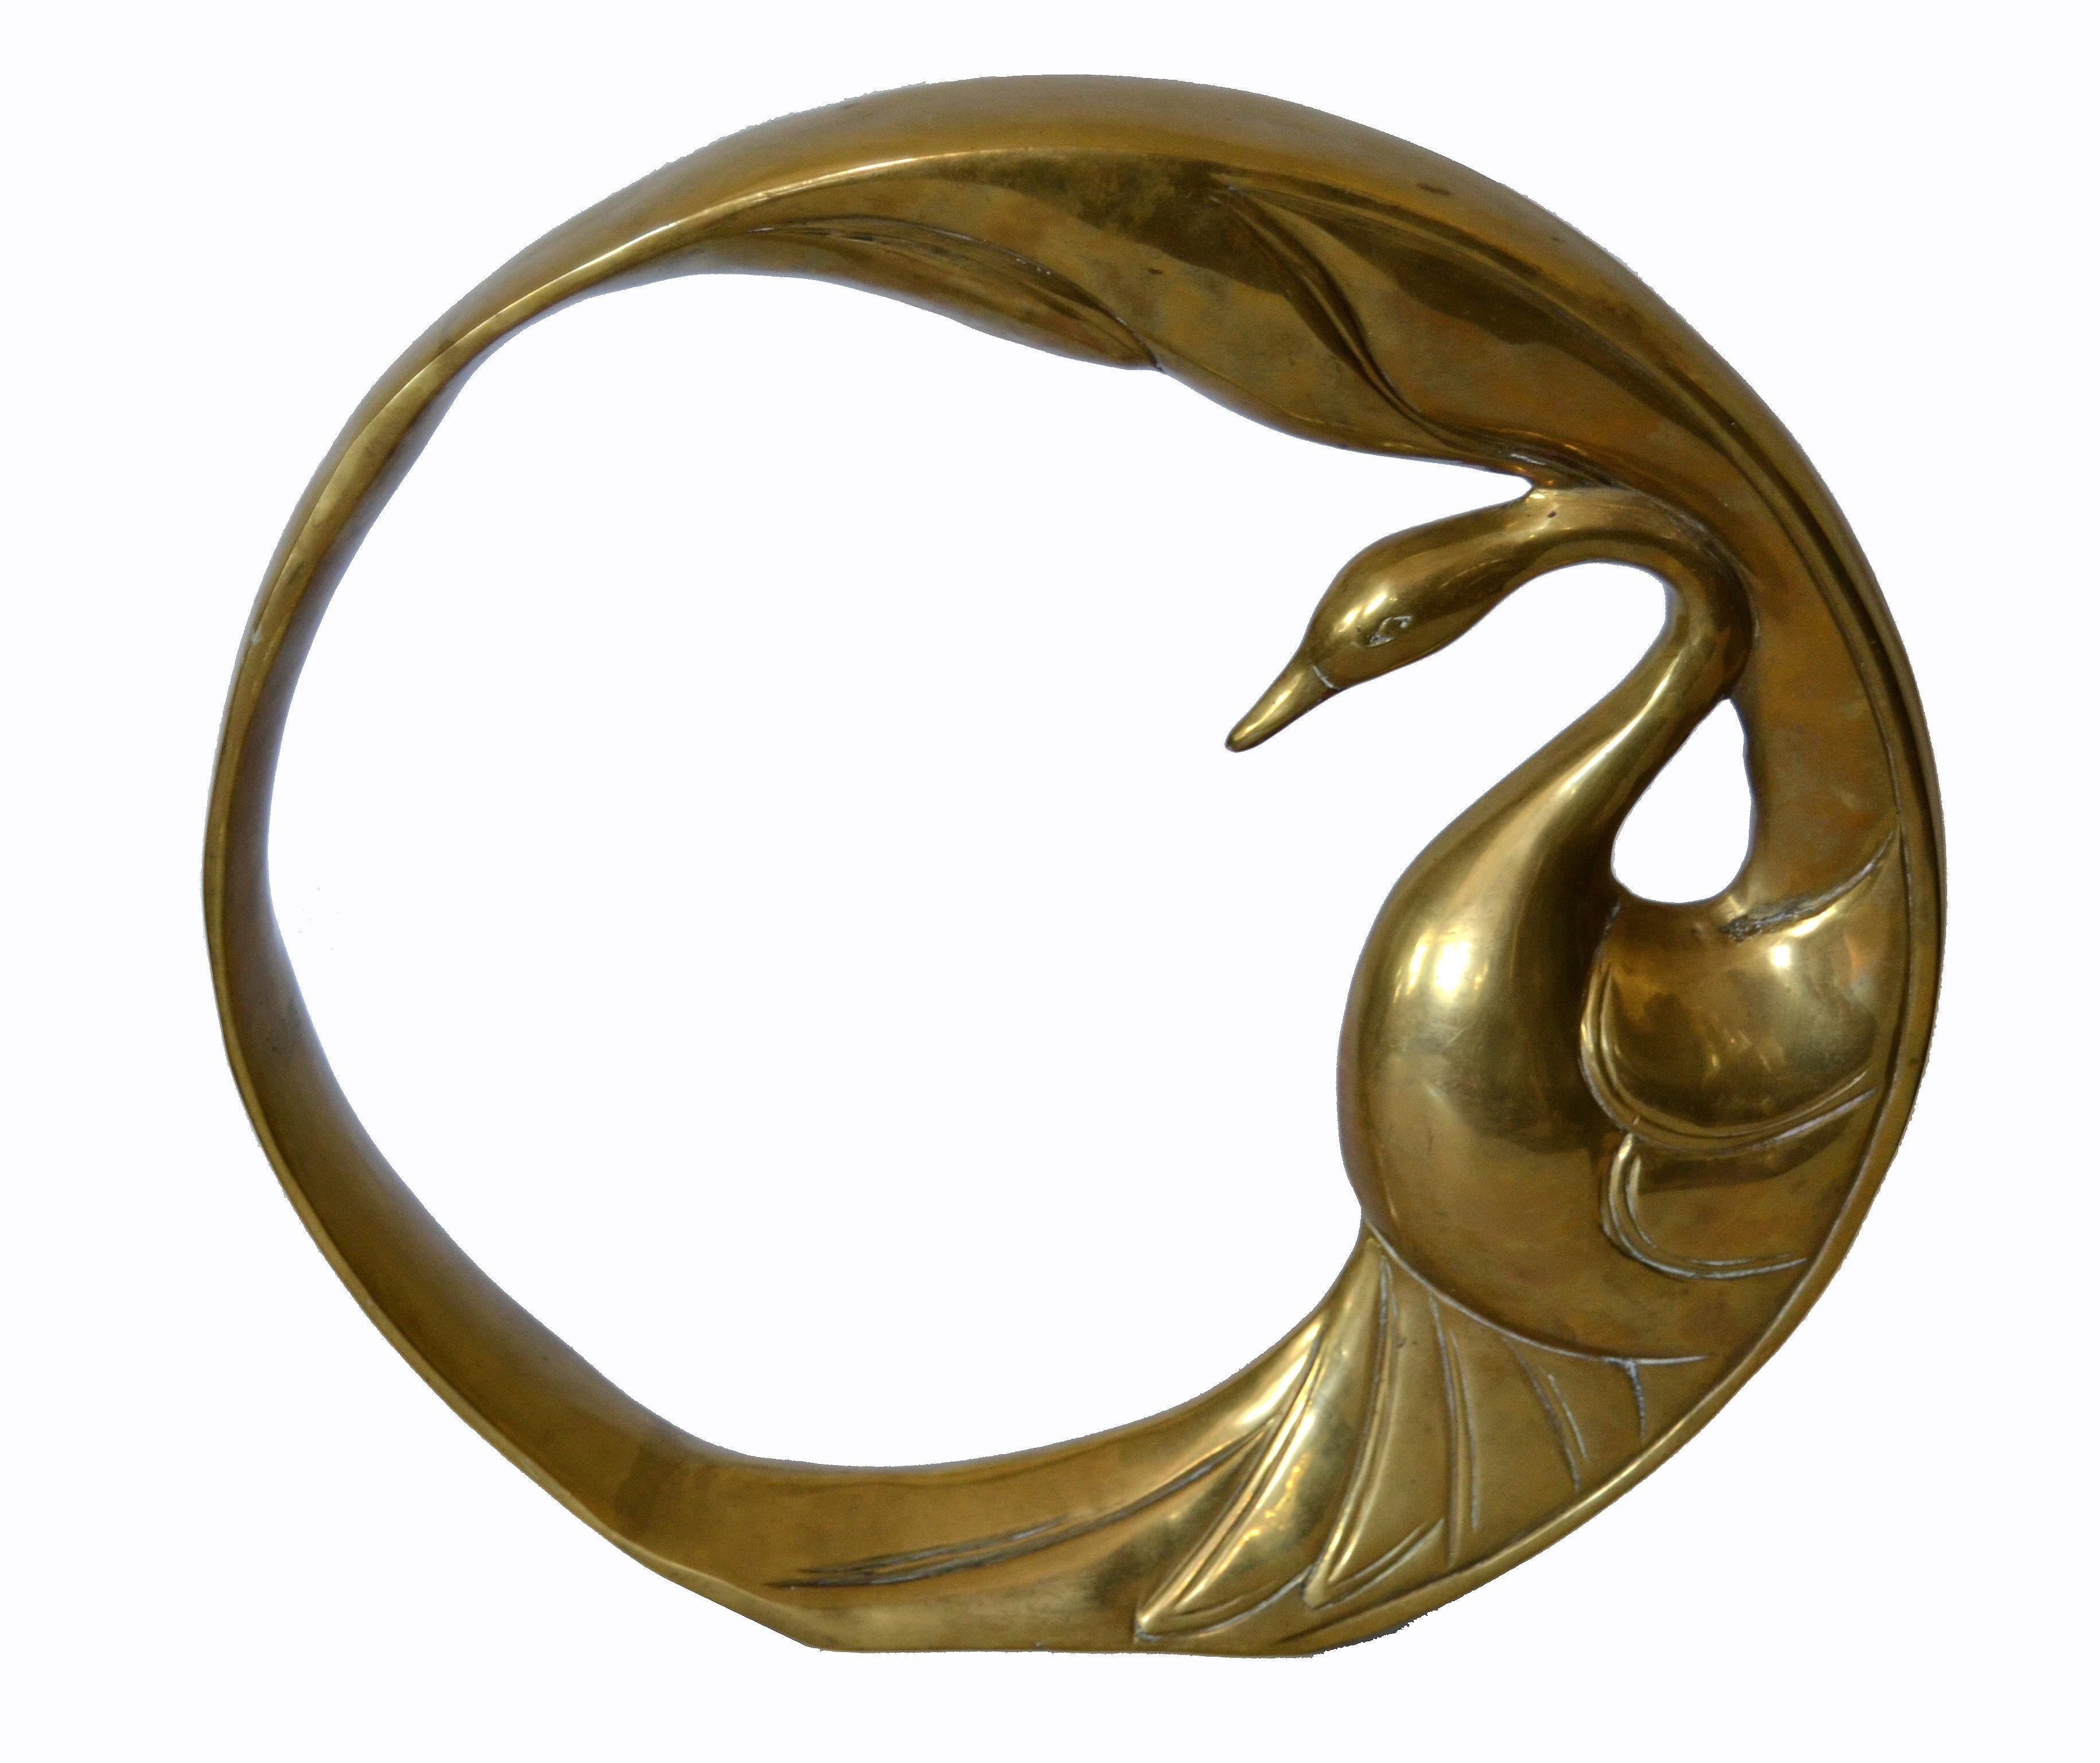 Hand-Crafted Mid-Century Modern Bronze Golden Swan Ring Table Sculpture by Dolbi Cashier 1984 For Sale